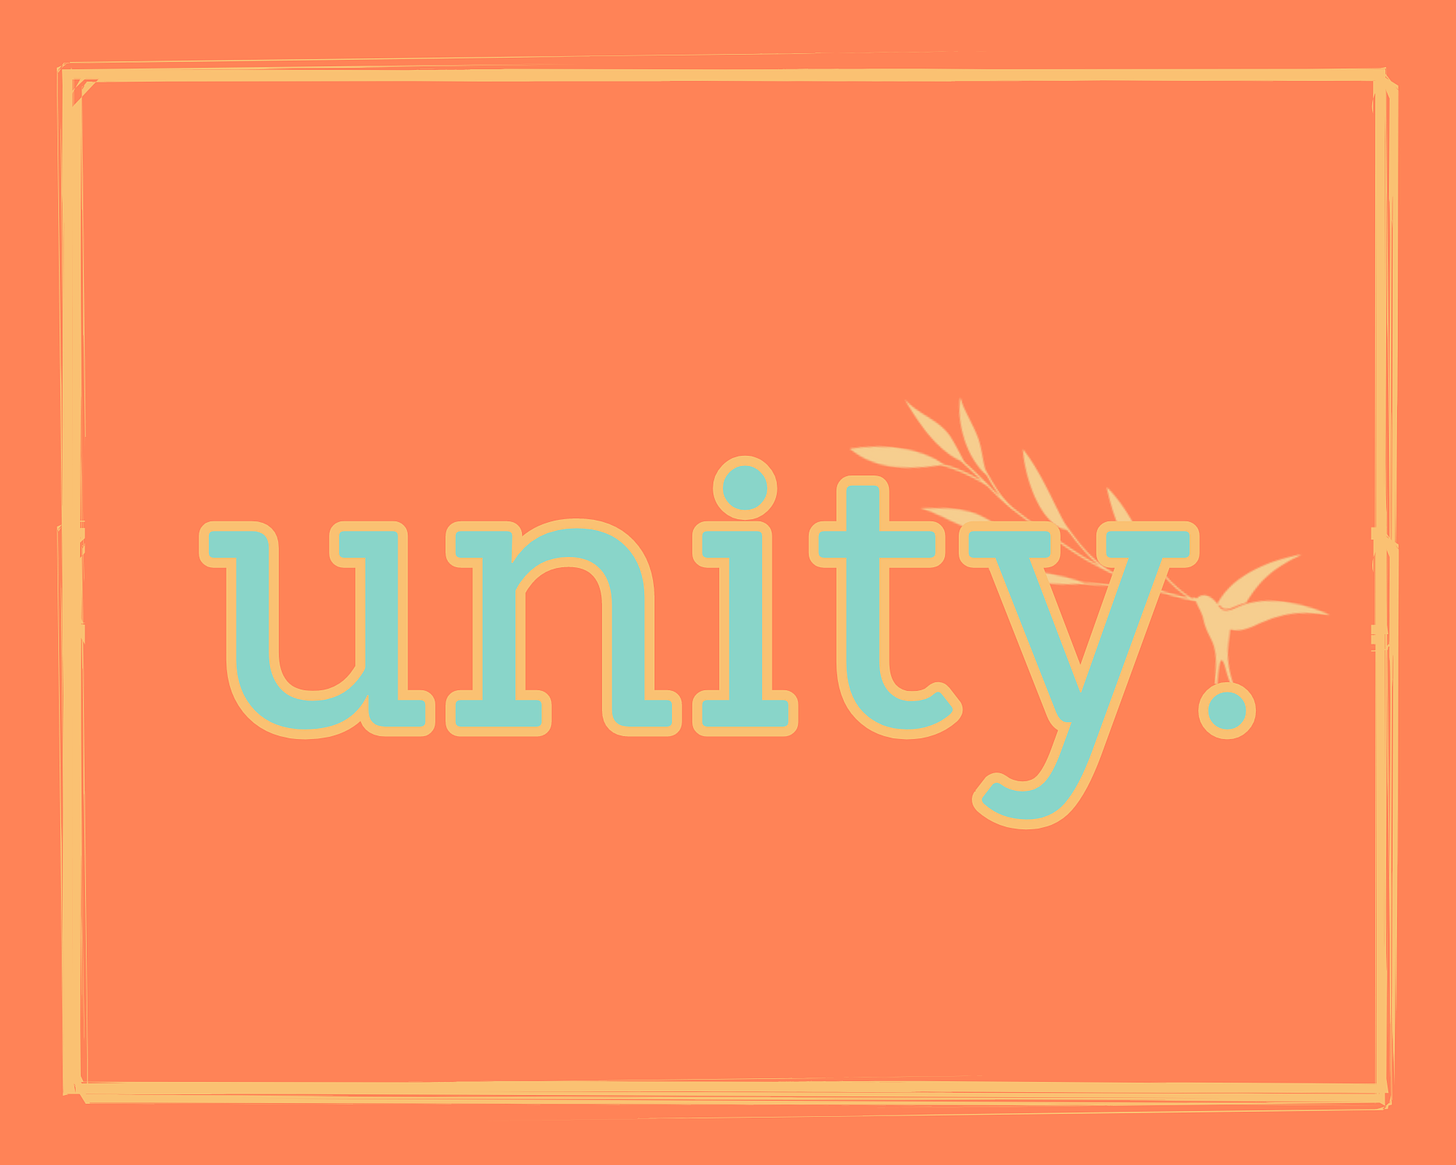 The word “unity” in light teal, outlined in orange cream, on a tangerine-colored background. A jagged orange cream rectangle surrounds the word. On the period after “unity,” the orange cream silhouette of a swallow perches, holding an olive branch that intertwines with part of the word.